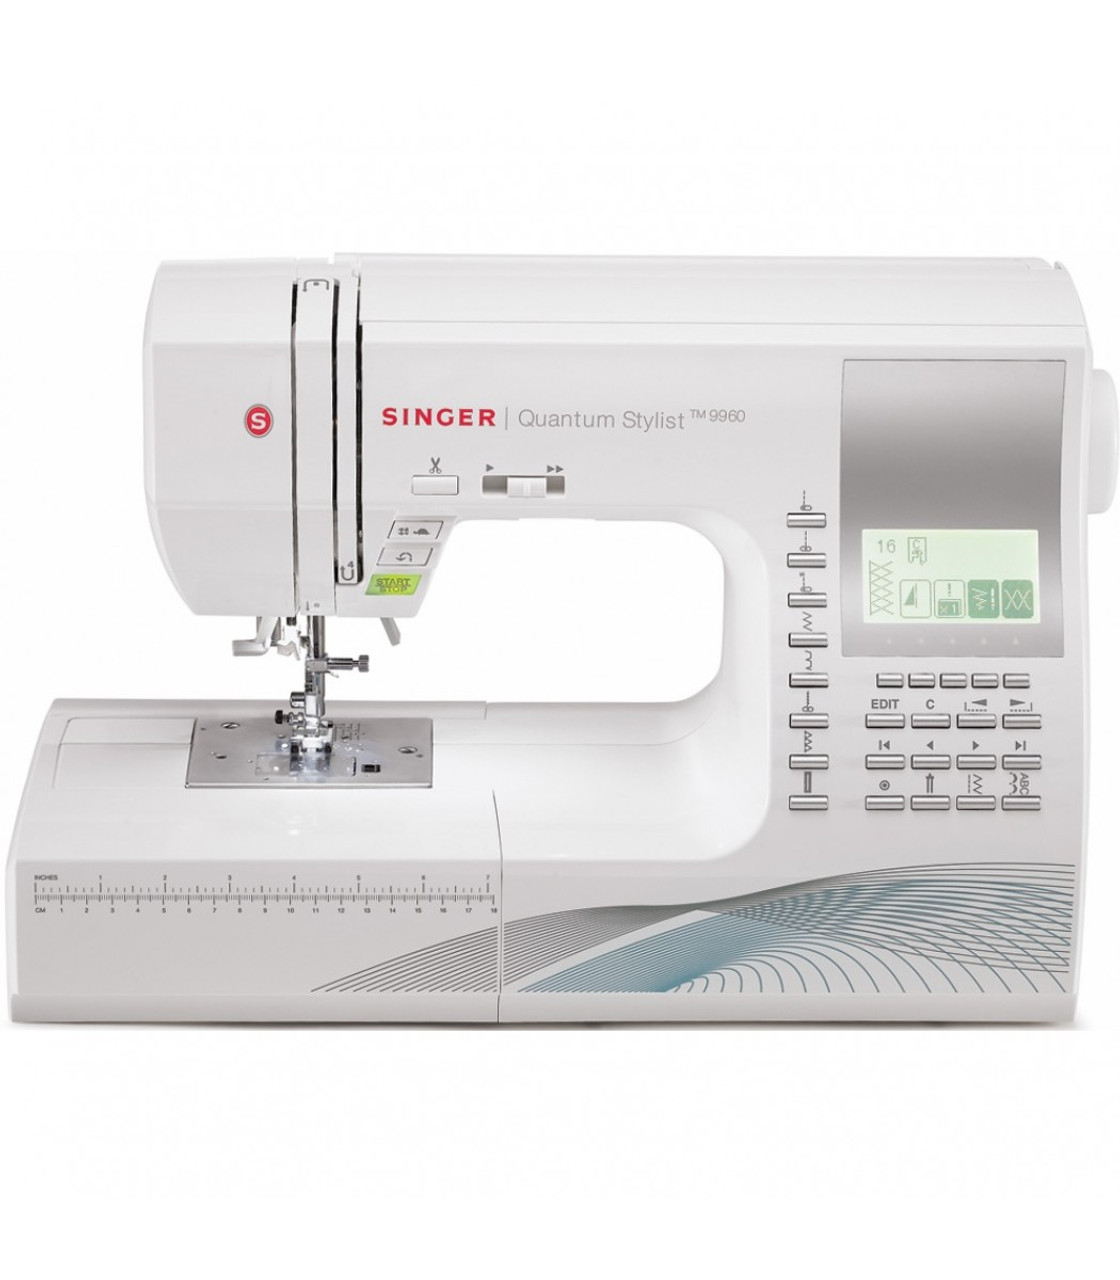 Highlights of the SINGER® Quantum Stylist™ 9960 Sewing Machine